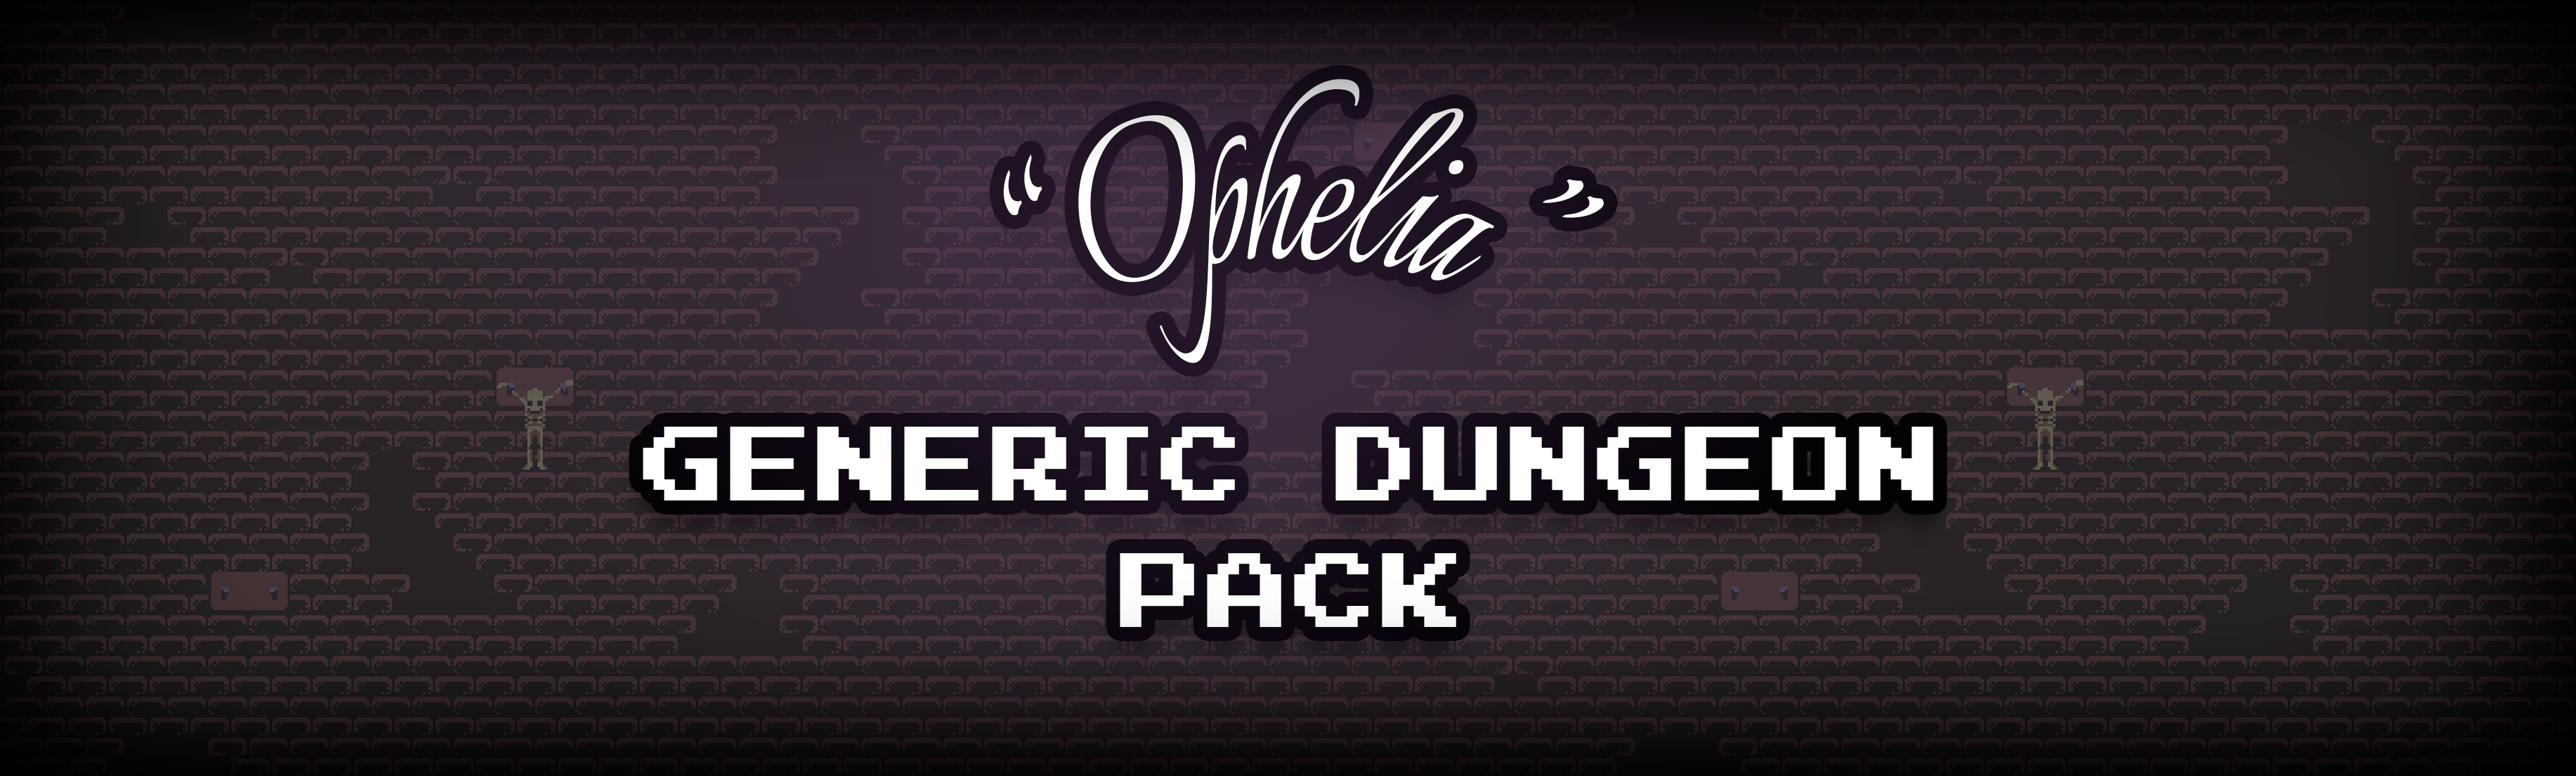 Ophelia - Generic Dungeon Pack